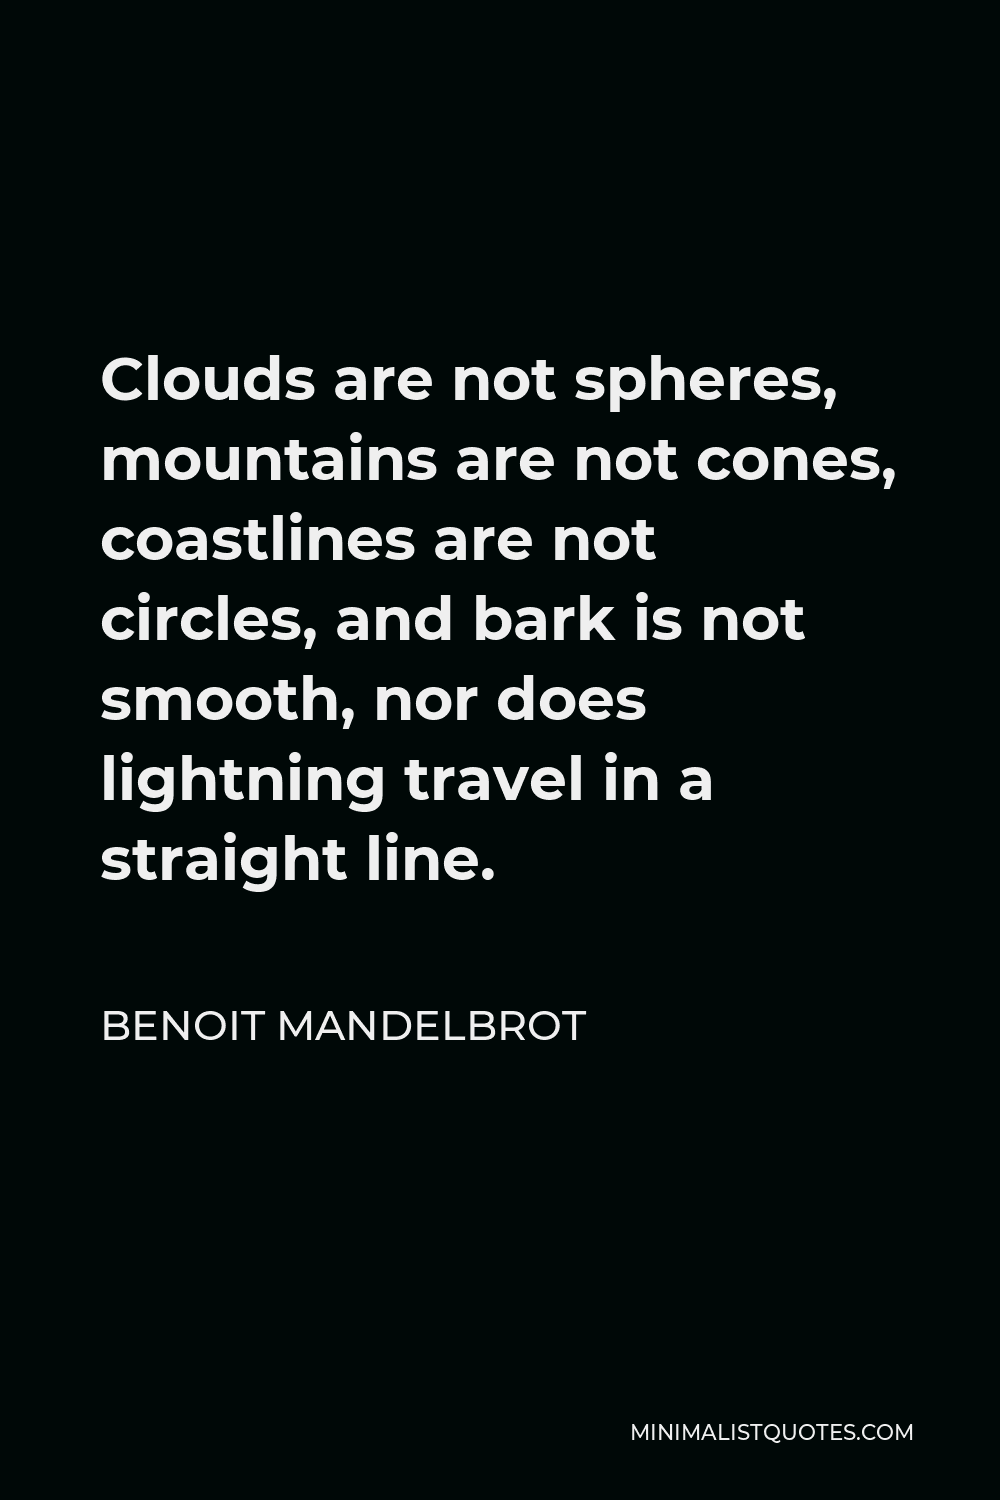 Benoit Mandelbrot Quote - Clouds are not spheres, mountains are not cones, coastlines are not circles, and bark is not smooth, nor does lightning travel in a straight line.